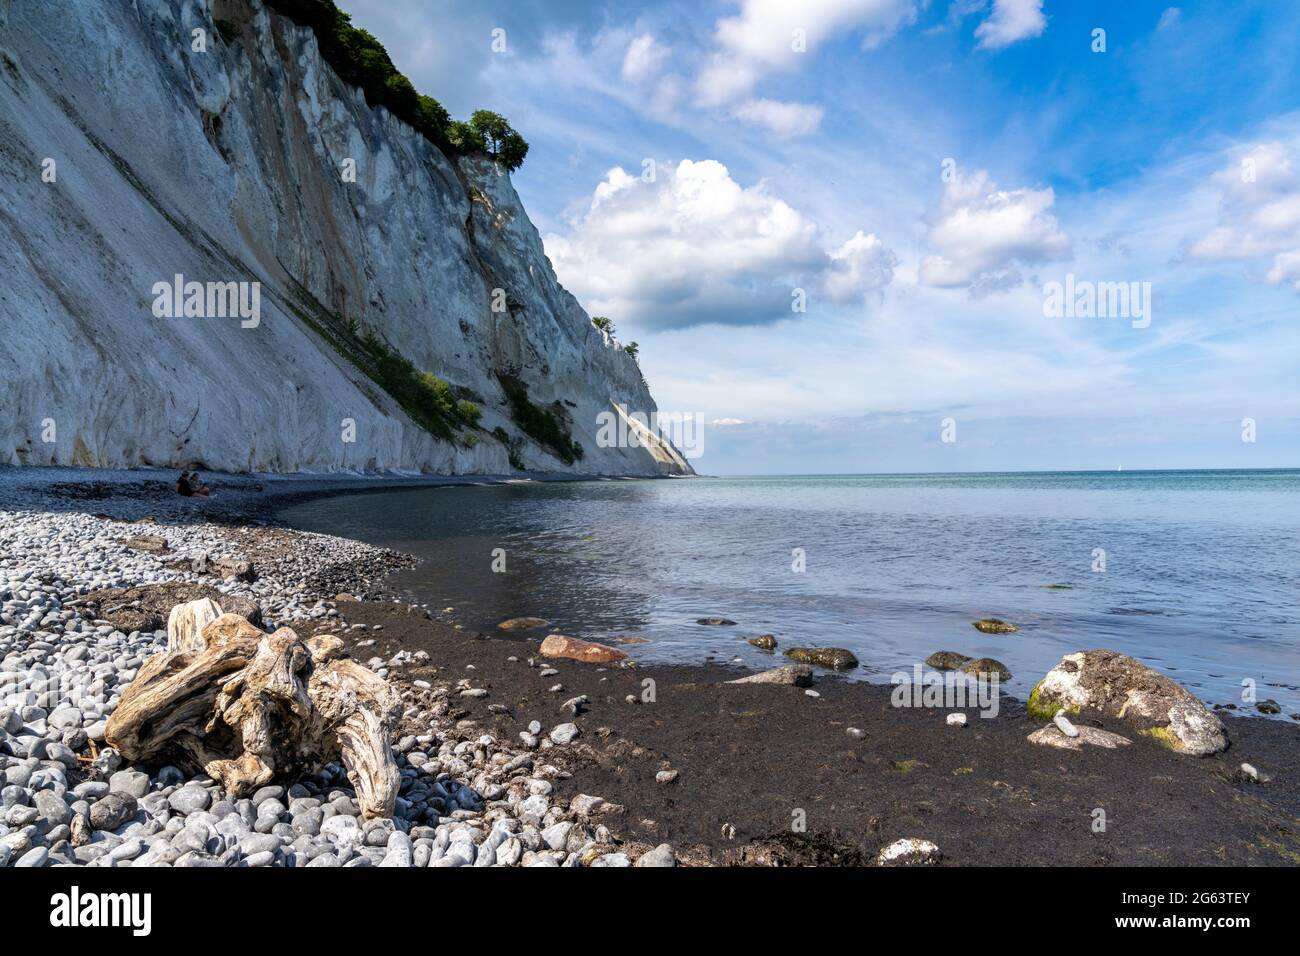 Beautiful tall  white chalkstone cliffs drop to a rocky beach with a calm ocean and driftwood in the foreground Stock Photo